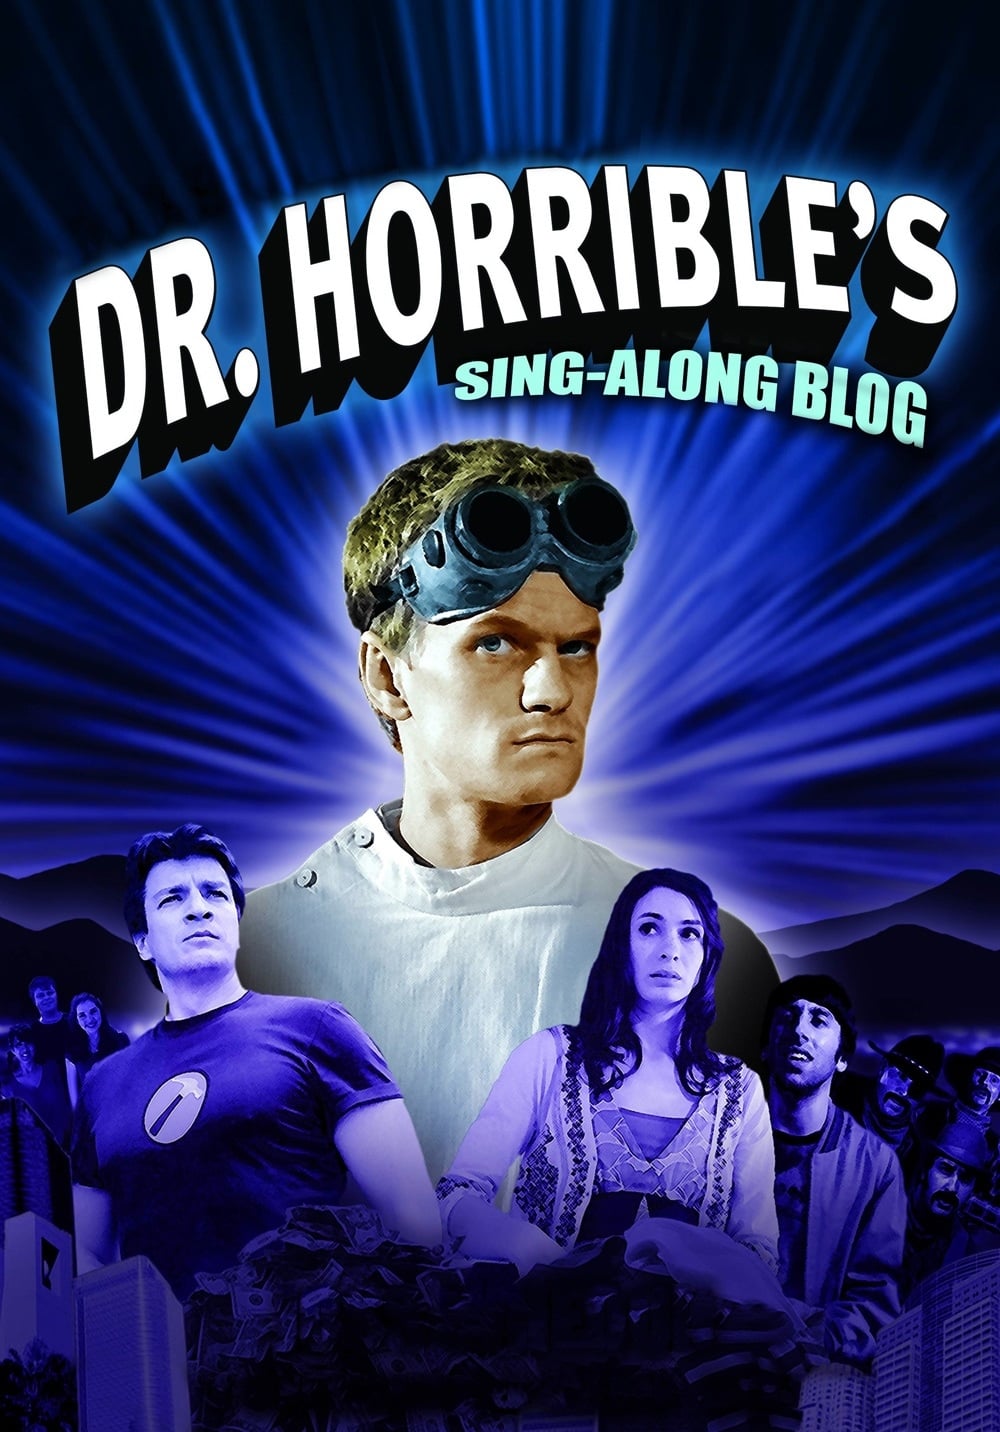 Dr. Horrible's Sing-Along Blog TV Shows About Mad Scientist